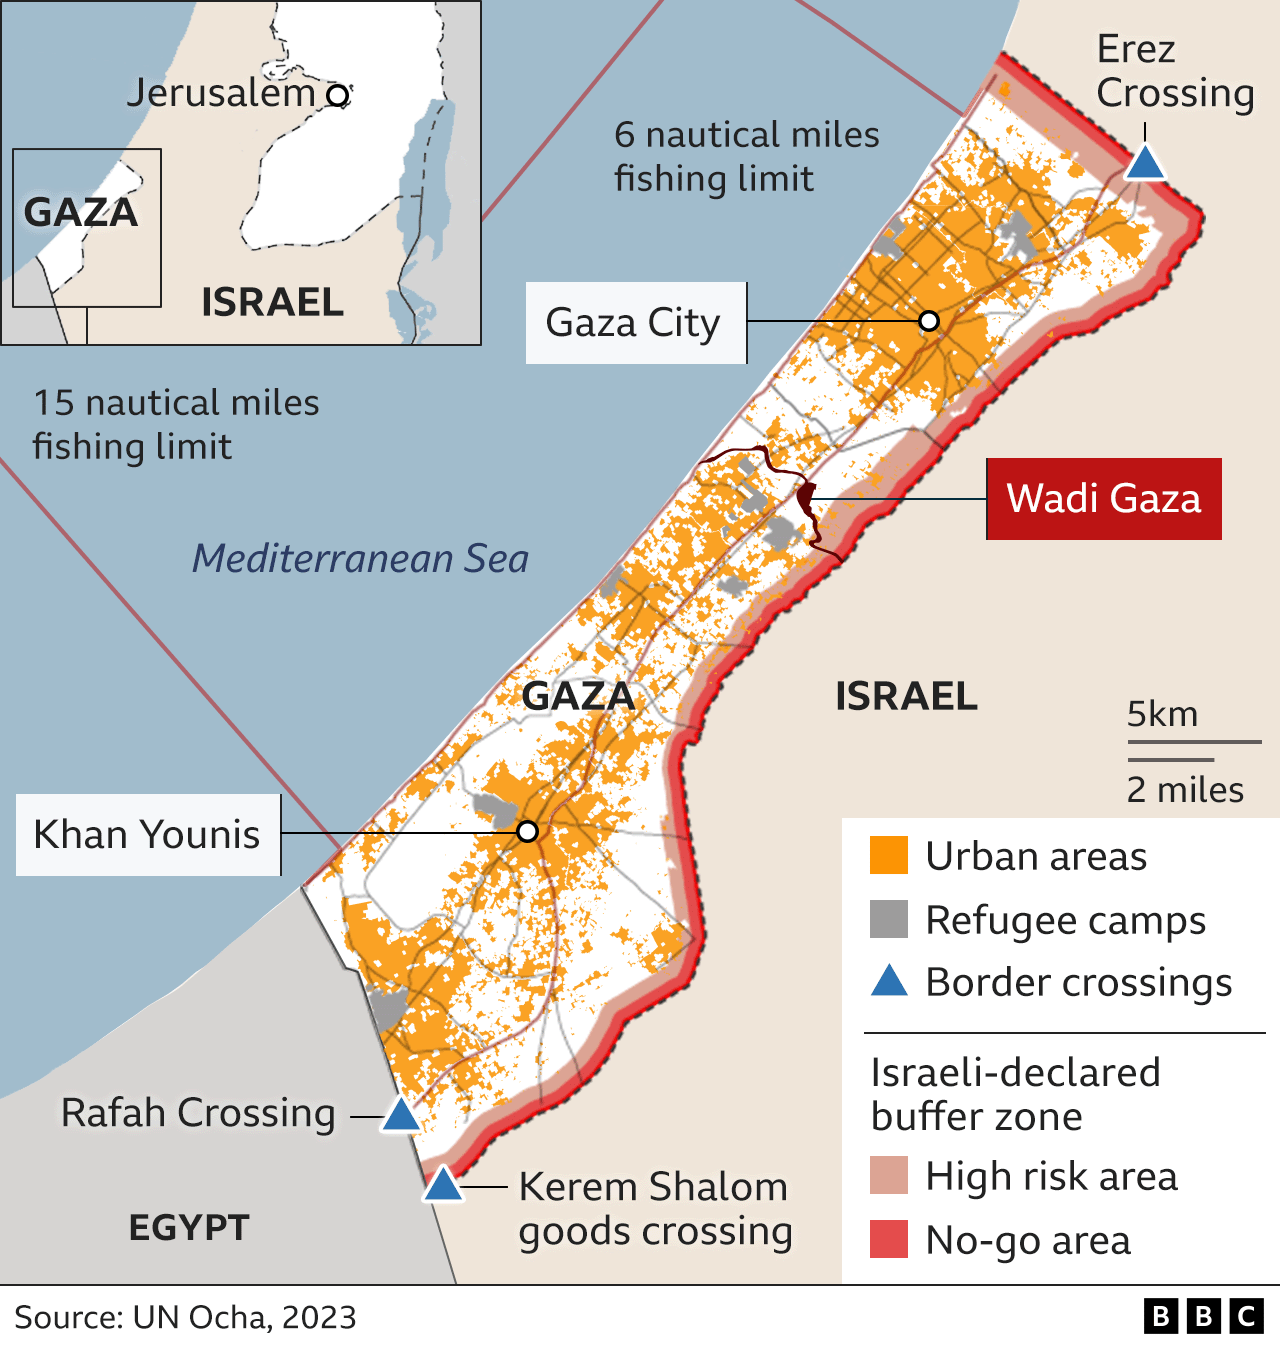 Map of Gaza, showing urban areas, refugee camps and border crossing between Gaza, Israel and Egypt. The map also shows the location of Wadi Gaza, as the Israel Defence Force has told people north of Wadi Gaza to evacuate south.